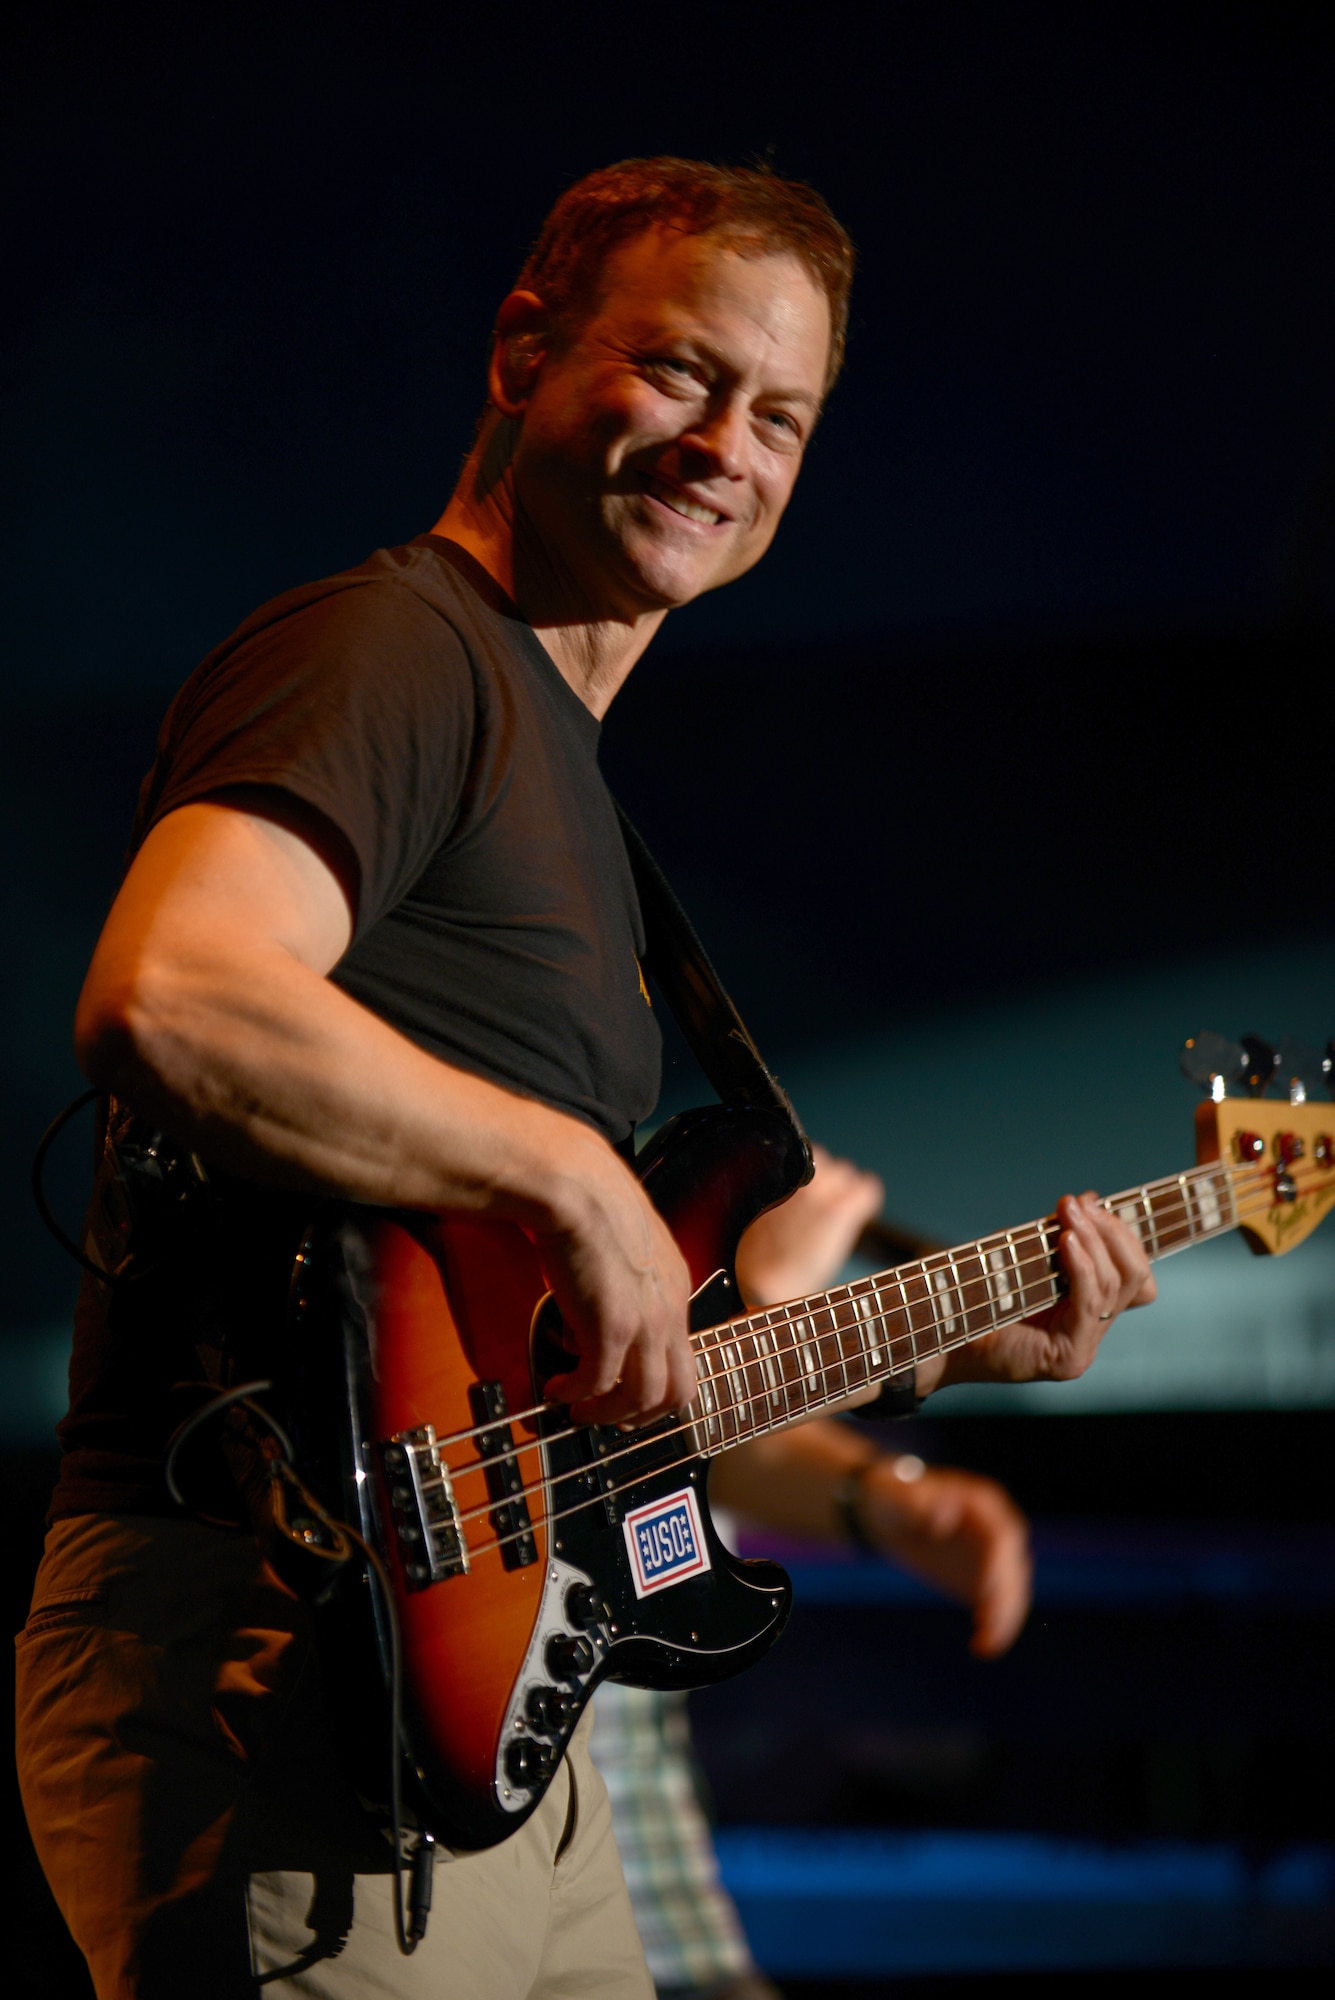 Gary Sinise, actor and bass player for the Lt. Dan Band, performs for military members and their families at U.S. Marine Corps Air Station Futenma, Japan, July 6, 2013. This was the last show on their USO tour of Pacific bases. Sinise is also the founder of the Gary Sinise Foundation, an organization dedicated to providing assistance to those who serve in their time of need. (U.S. Air Force photo by Tech. Sgt. Jocelyn Rich-Pendracki/Released)